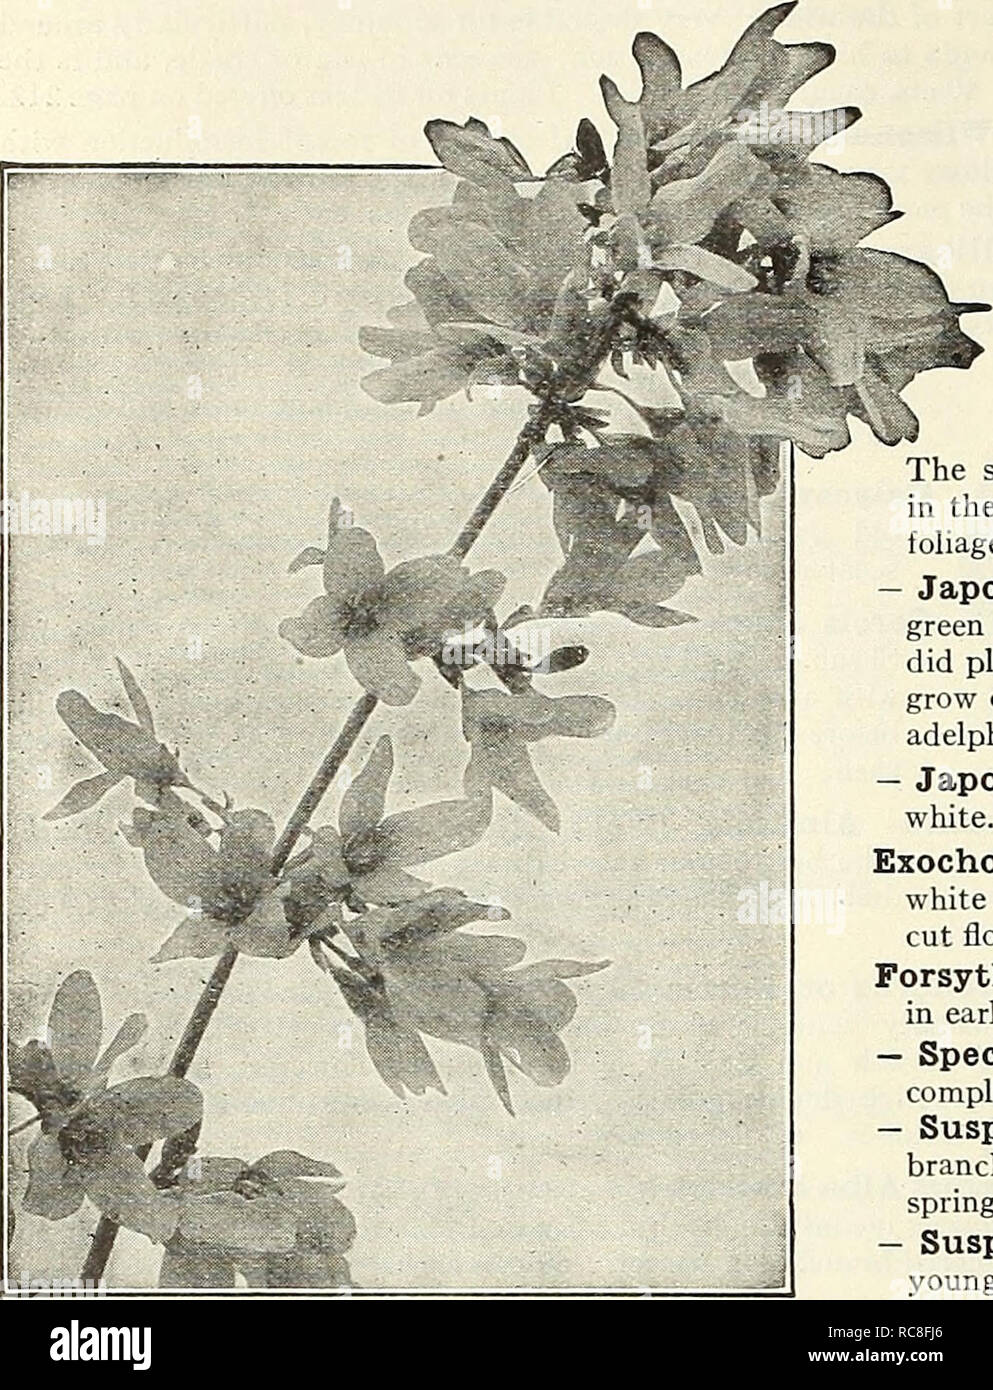 . Dreer's garden book 1930. Seeds Catalogs; Nursery stock Catalogs; Gardening Equipment and supplies Catalogs; Flowers Seeds Catalogs; Vegetables Seeds Catalogs; Fruit Seeds Catalogs. 202 /flEIMM M CHOICE HARDY SHRUBS &gt;HMEIiPlM !. FORSYTHIA Crataegus Oxyacantha Paul's Double (English Hawthorn). This is the finest variety with brilliant scarlet double flowers. Plants 3 to 4 feet high, $2.00 each. Desmodium Penduliflorum. A Shrub which dies to the ground in winter but comes up vigorously in spring, throwing up shoots 3 to 4 feet high, which bear during September attractive sprays of bright ro Stock Photo